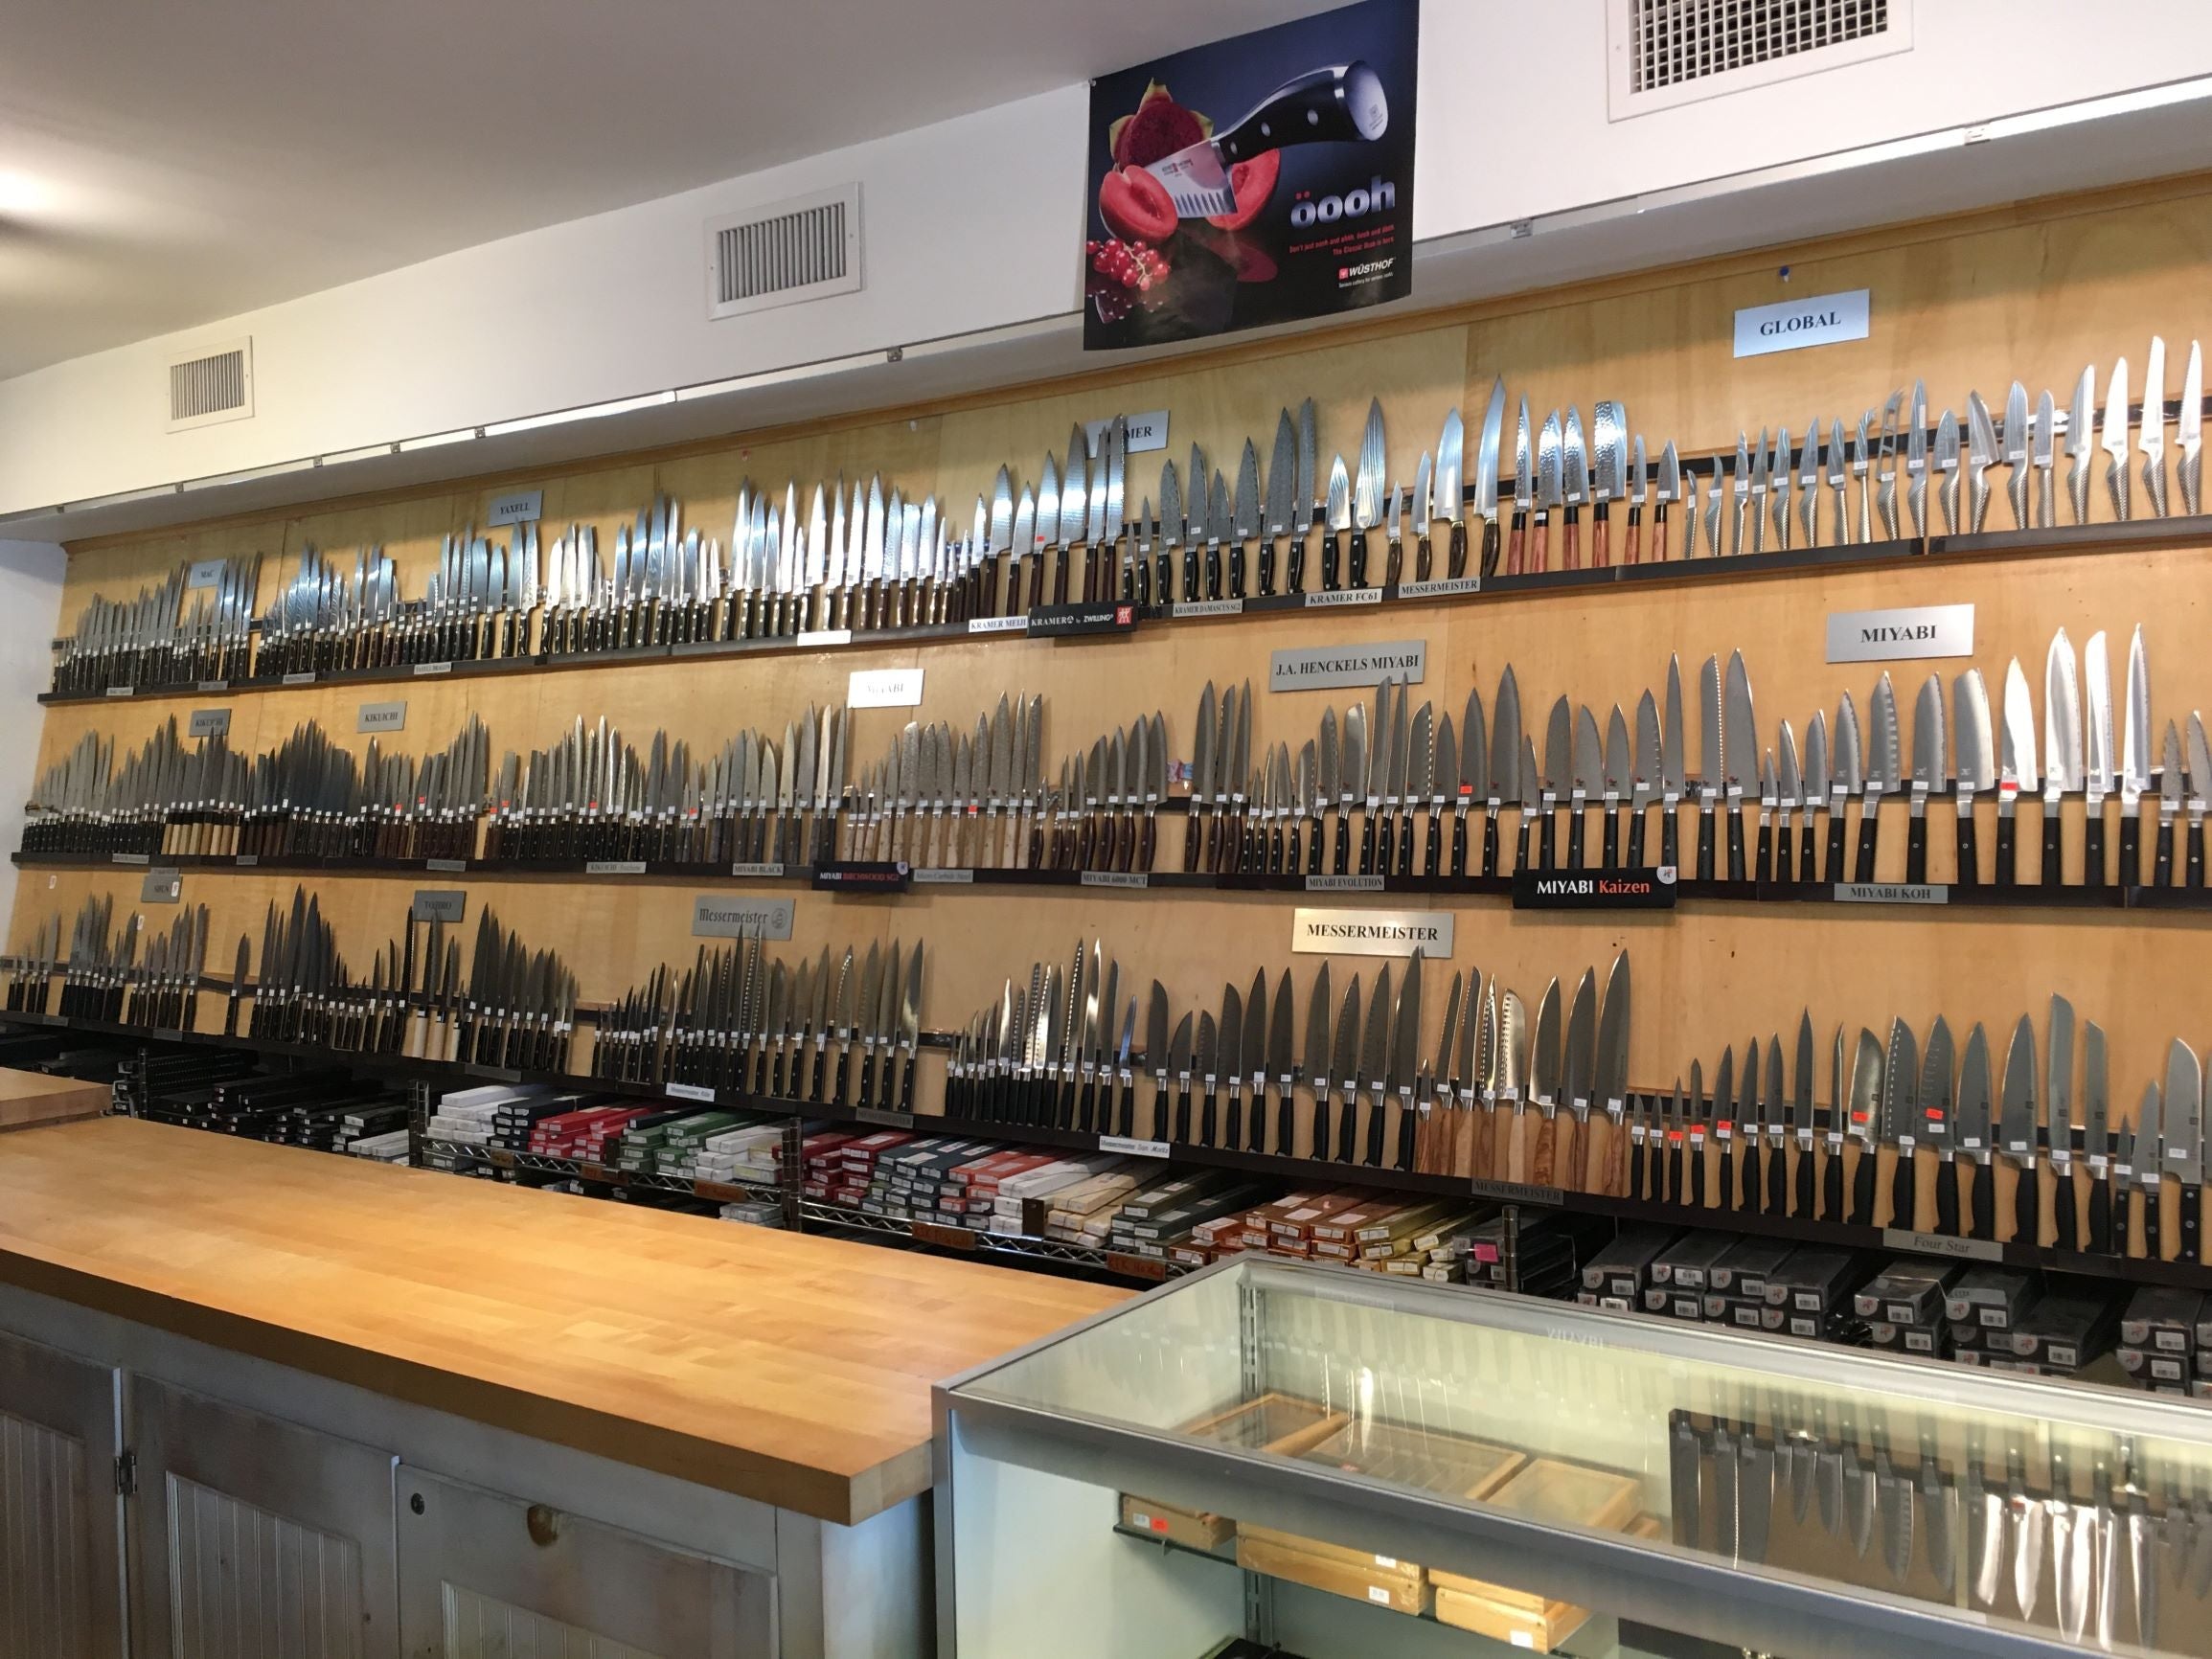 GLOBAL KNIVES/SCANPAN Archives - Cutler's